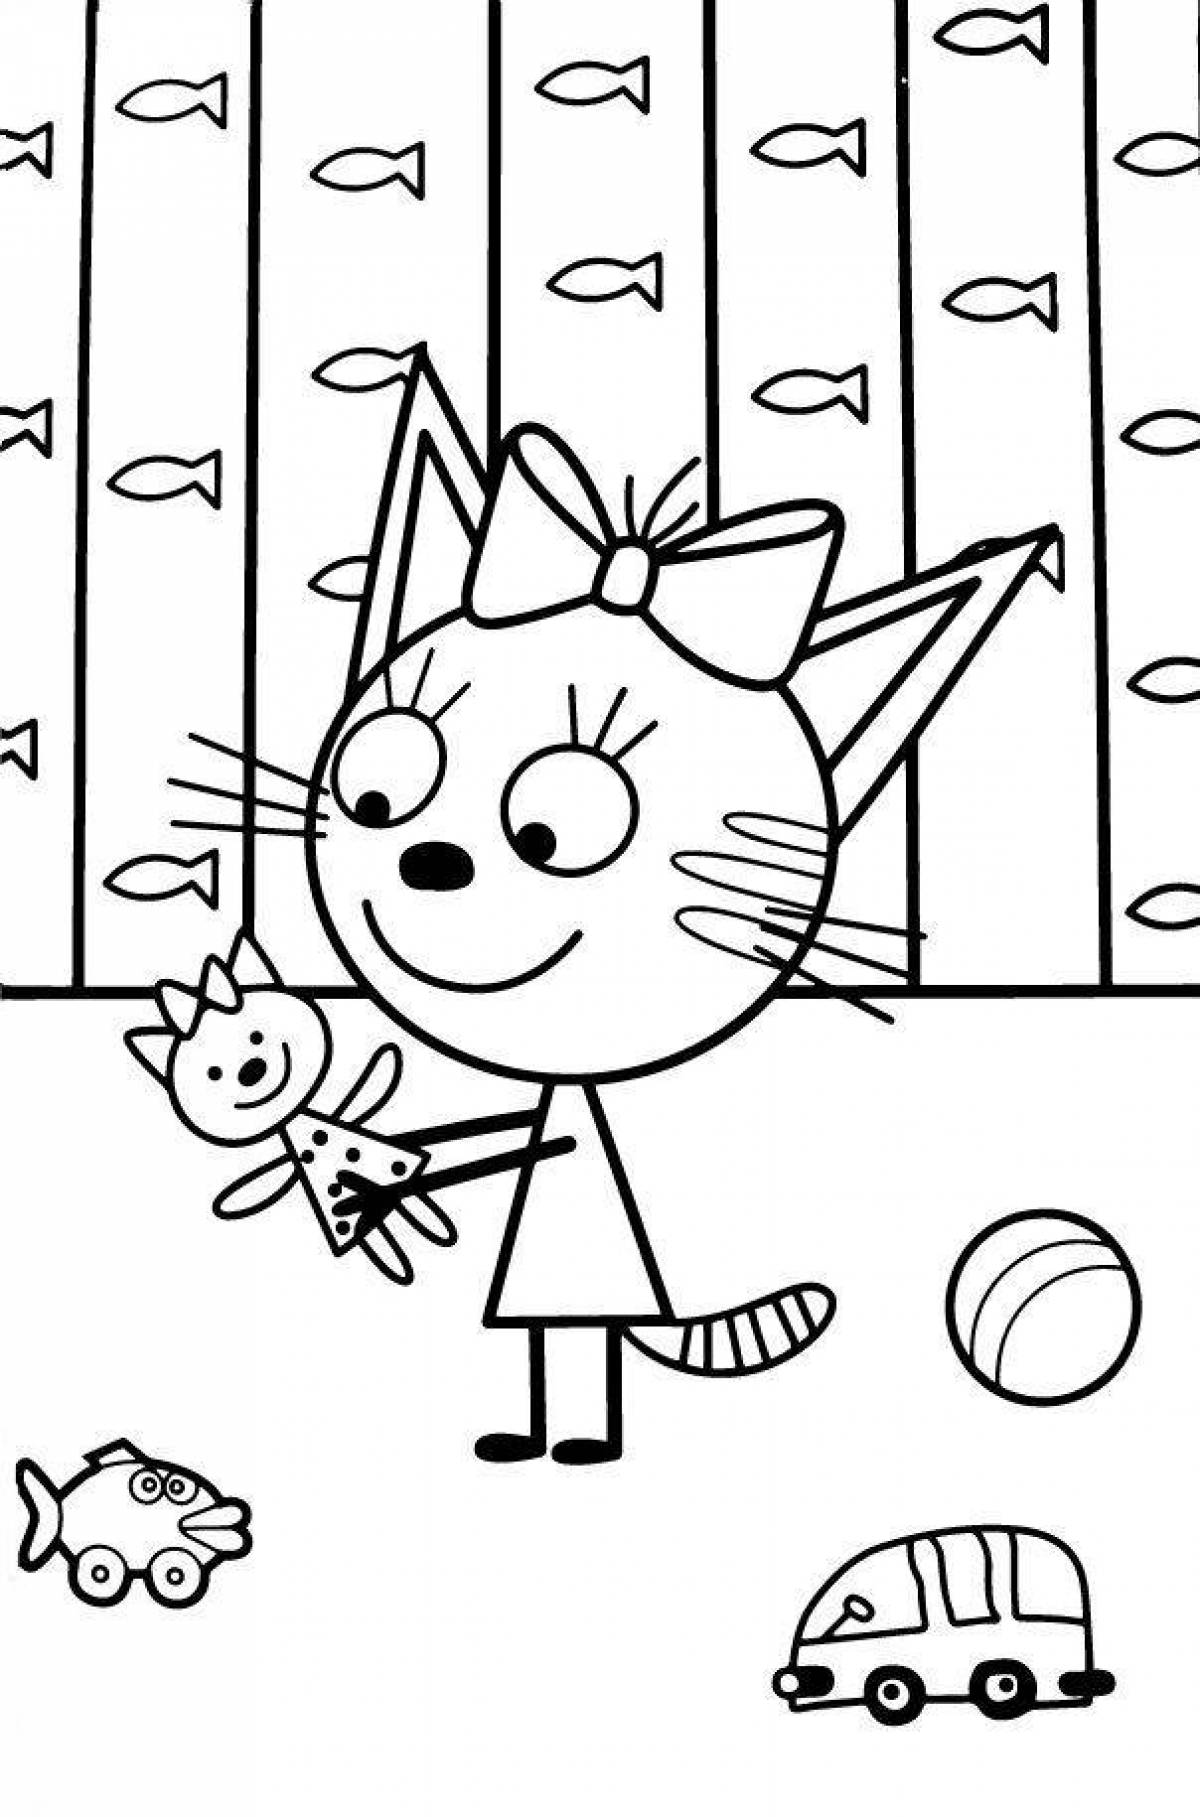 Three cats fun coloring book for kids